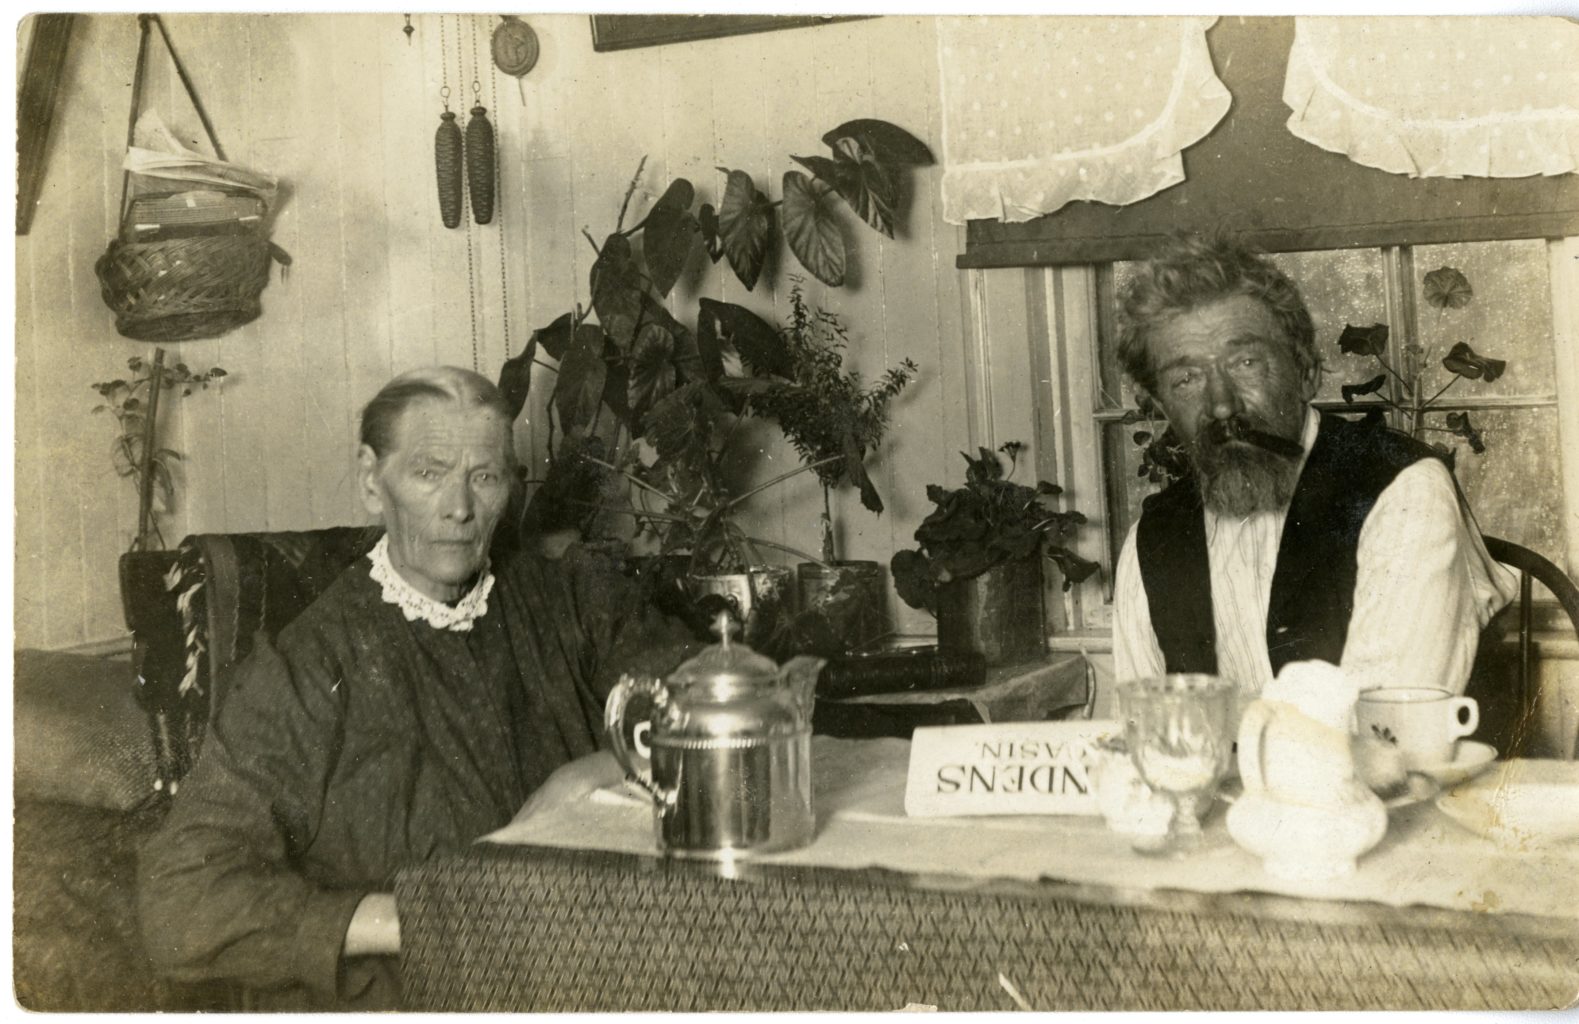 Man and woman sit together inside around a table.